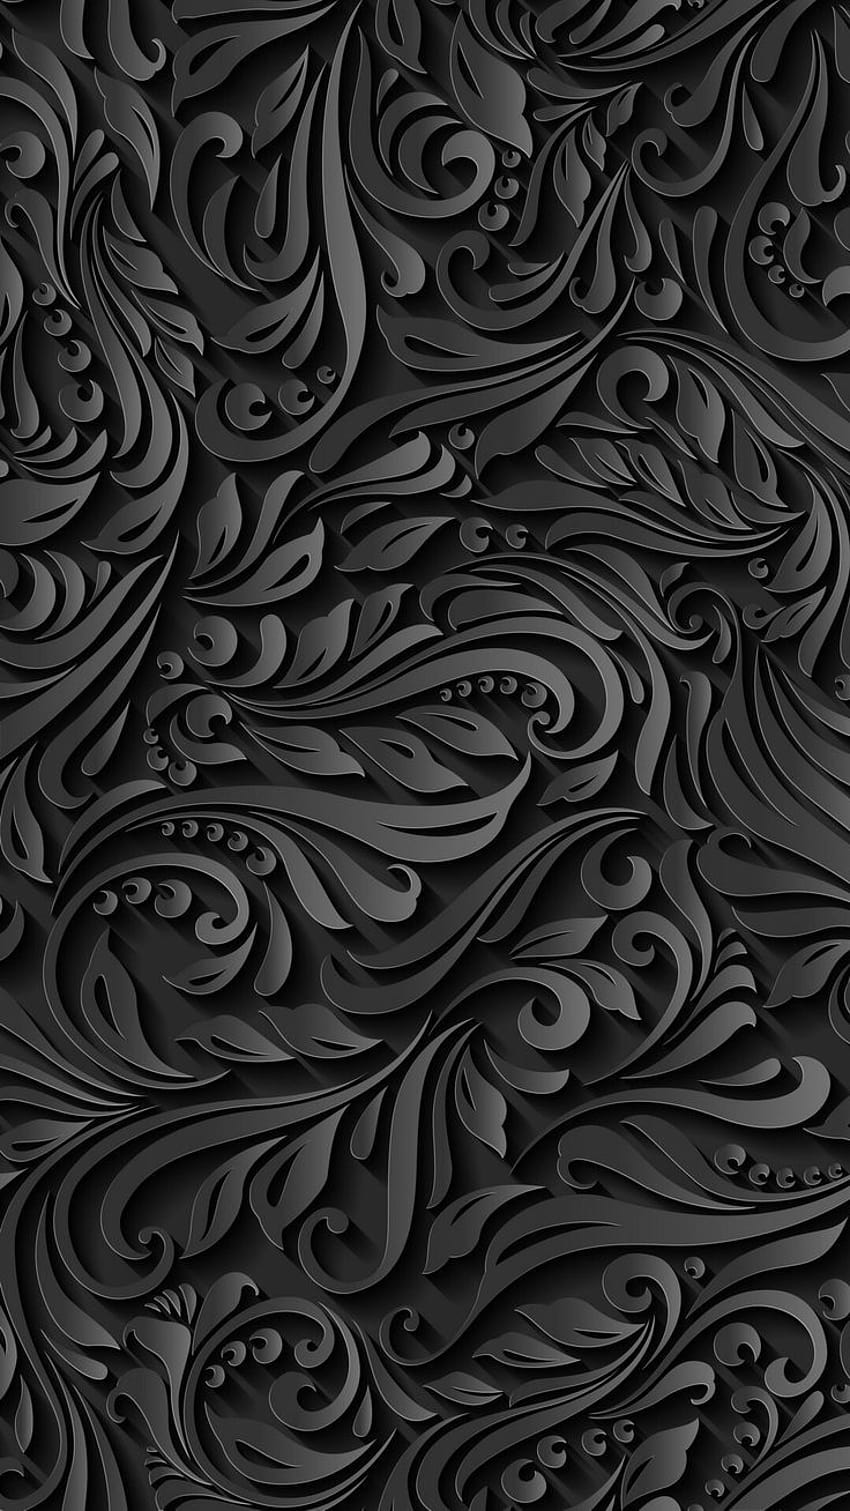 Artistic Full and Backgrounds 1920x1200 ID, floral black lace iphone HD phone wallpaper